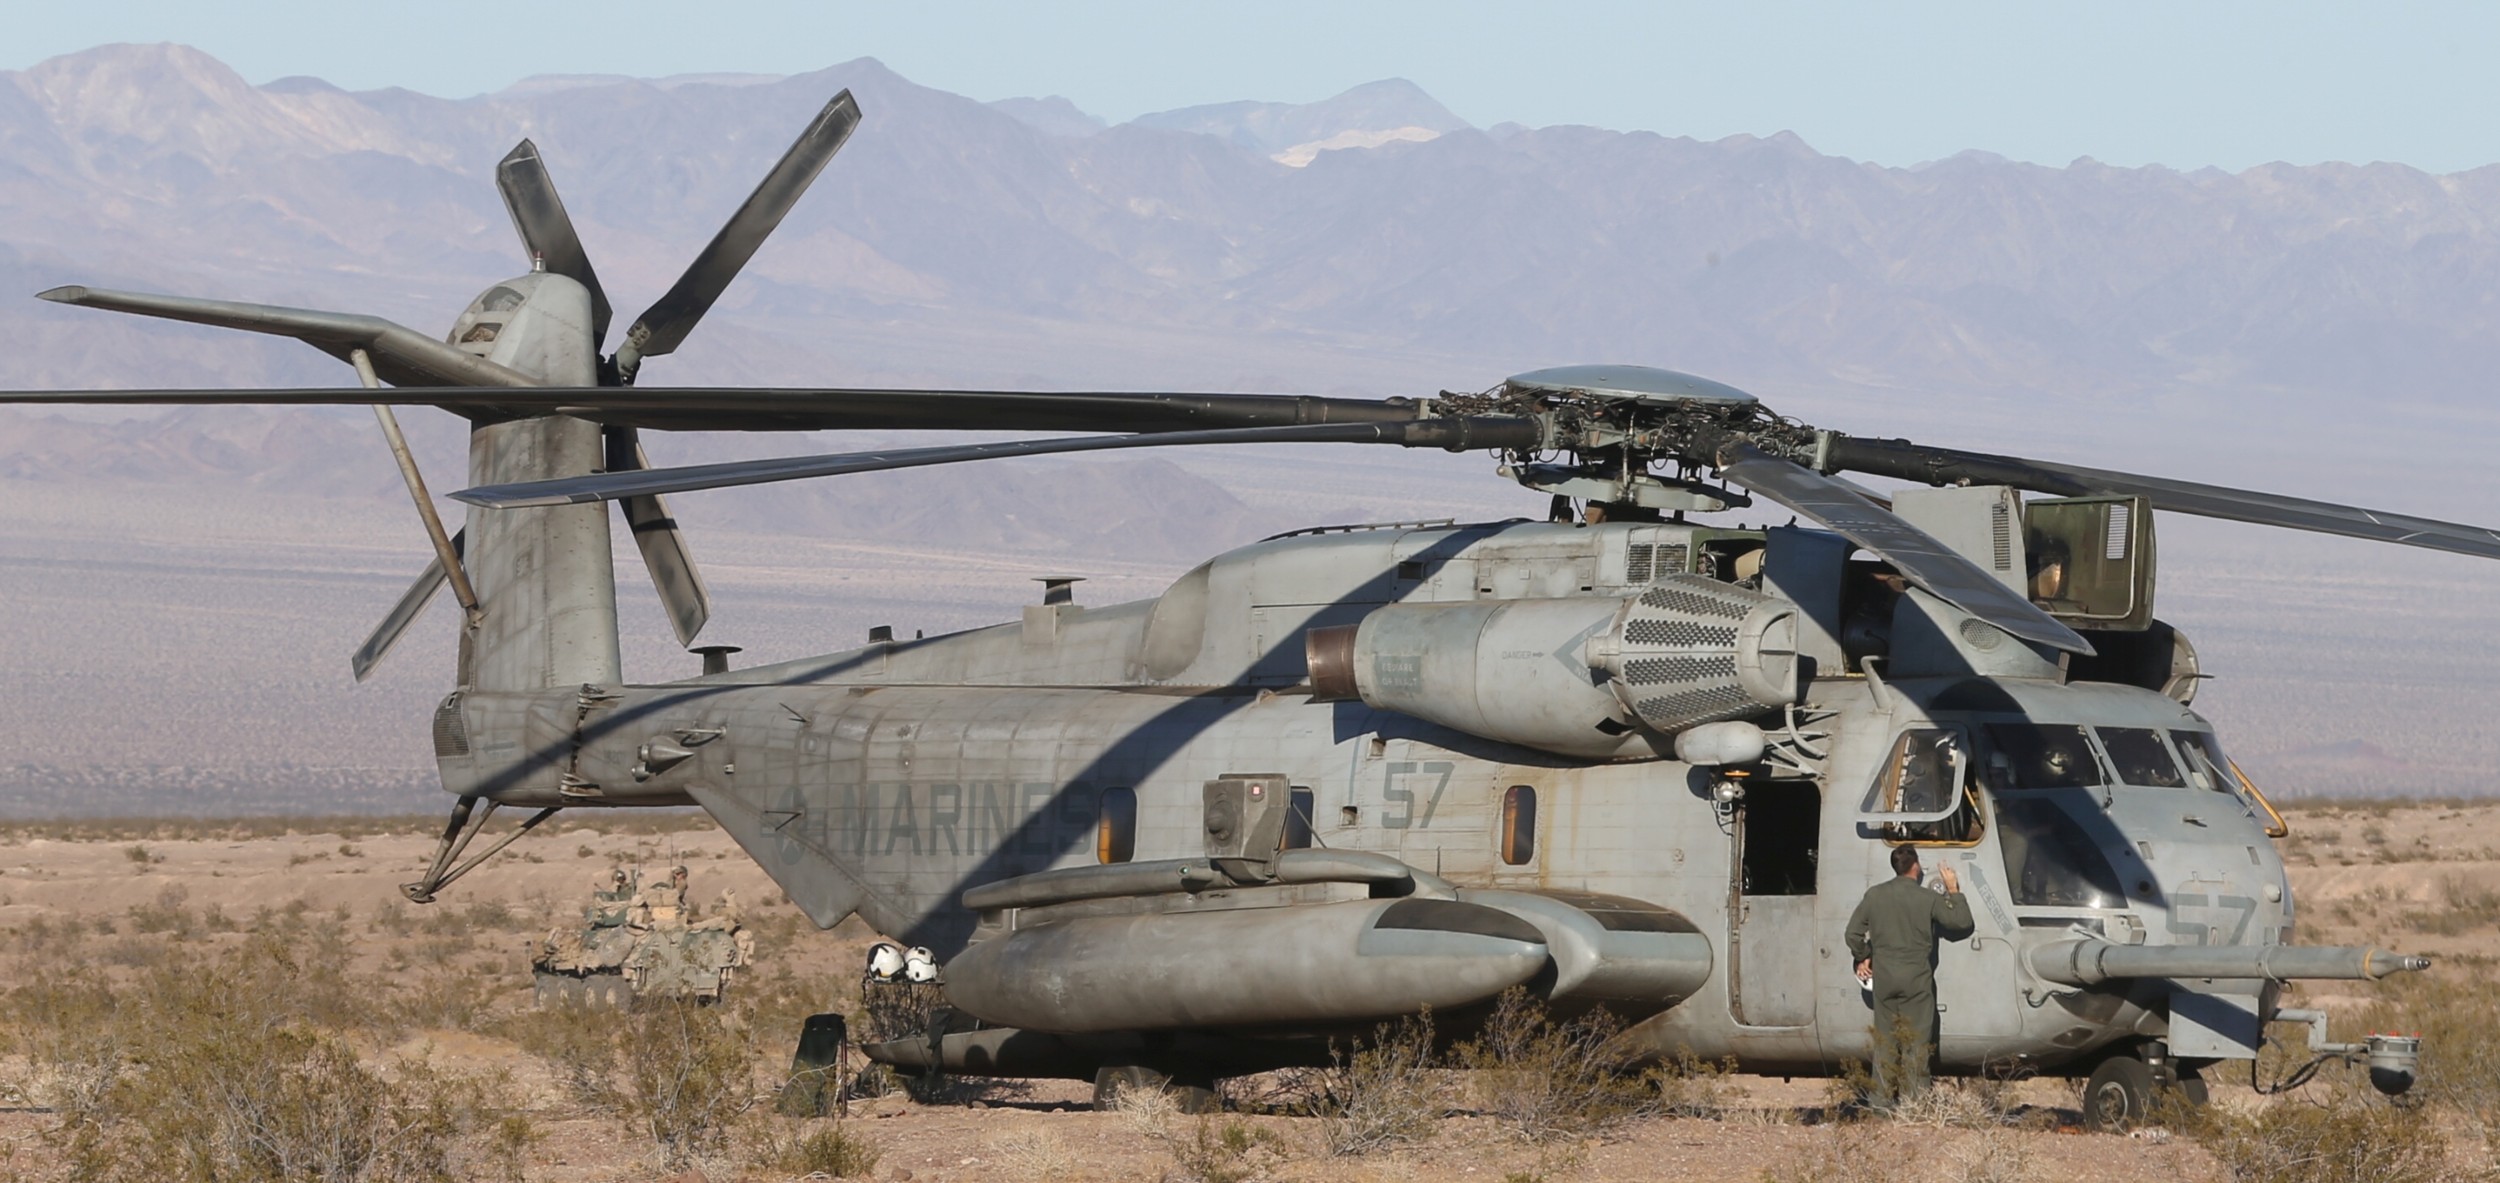 hmh-361 flying tigers marine heavy helicopter squadron usmc sikorsky ch-53e super stallion 27